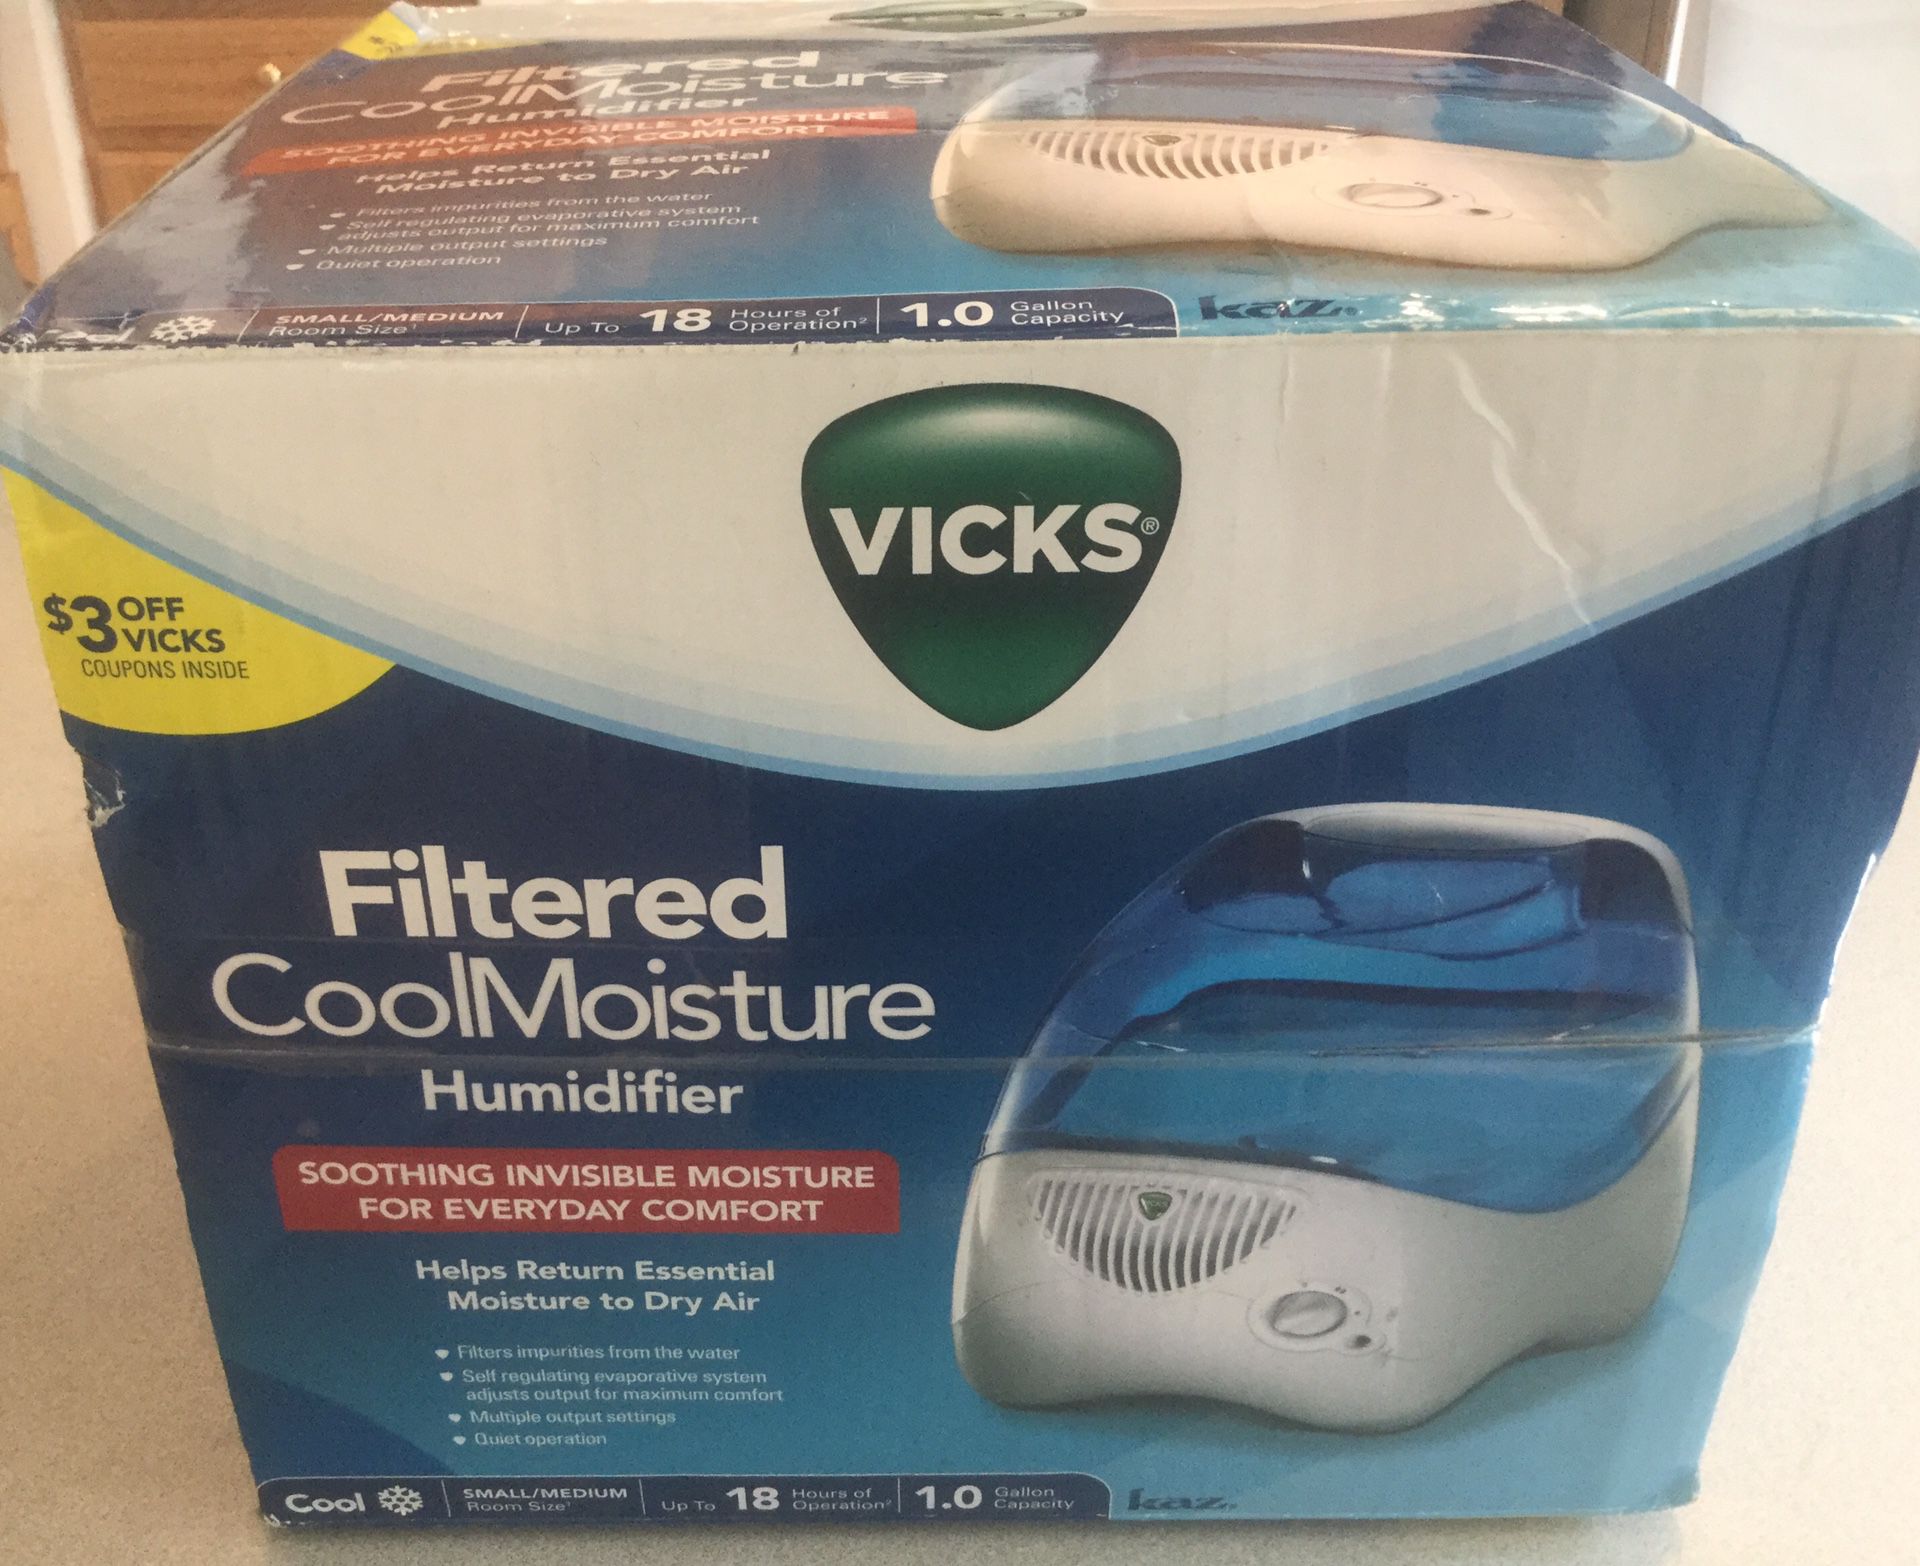 Filtered CoolMoisture Humidifier rand New never opened never used